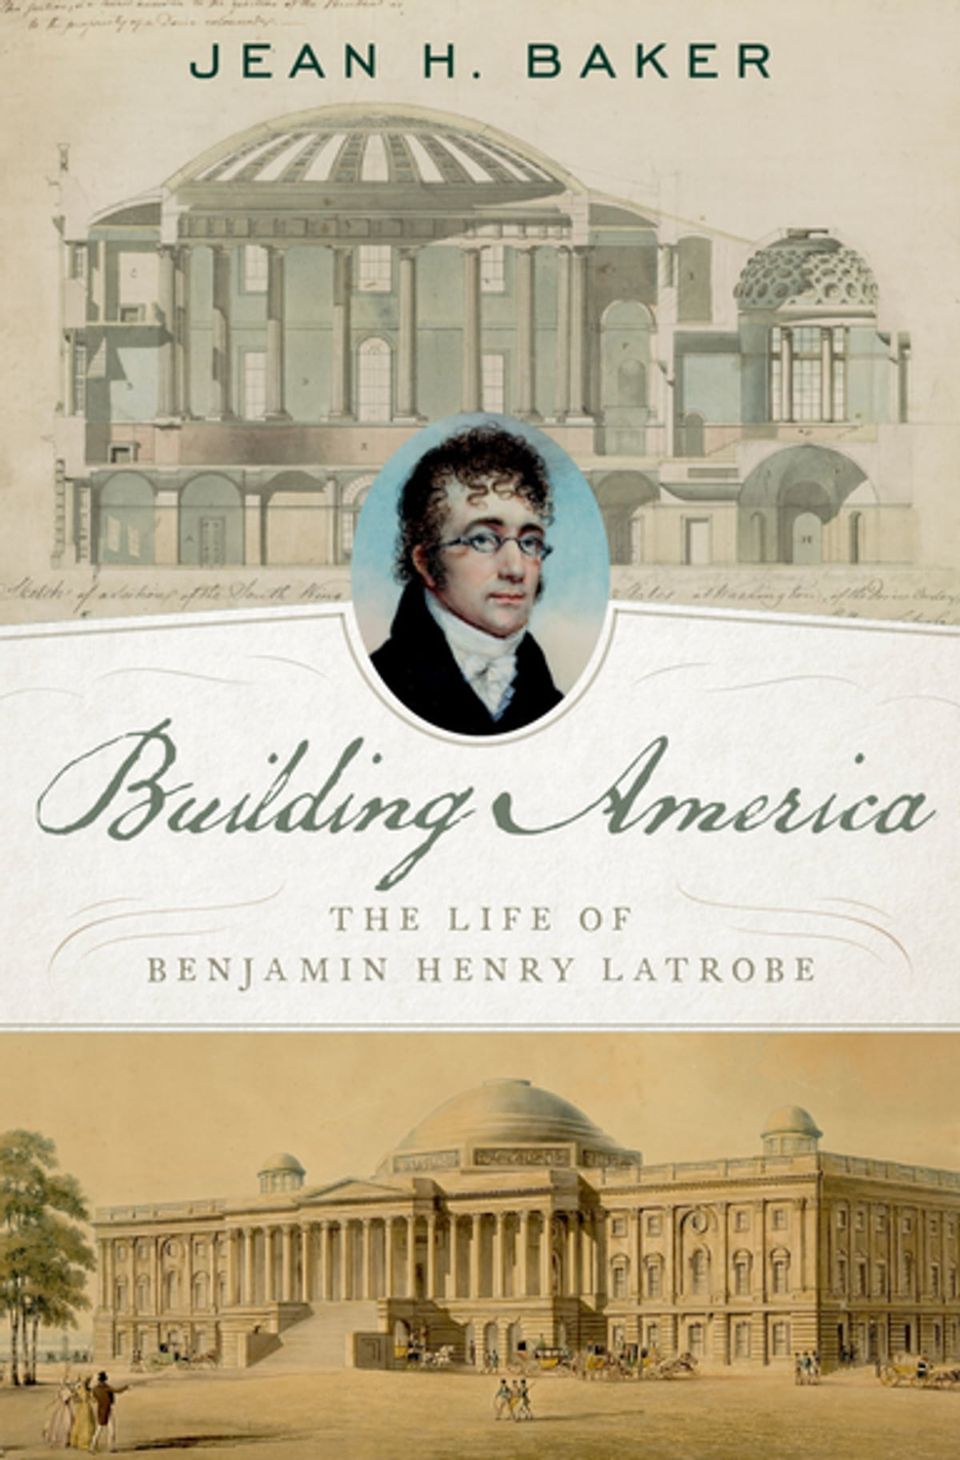 Two architectural drawings and a portrait of Benjamin Henry Latrobe, the subject of the biography.